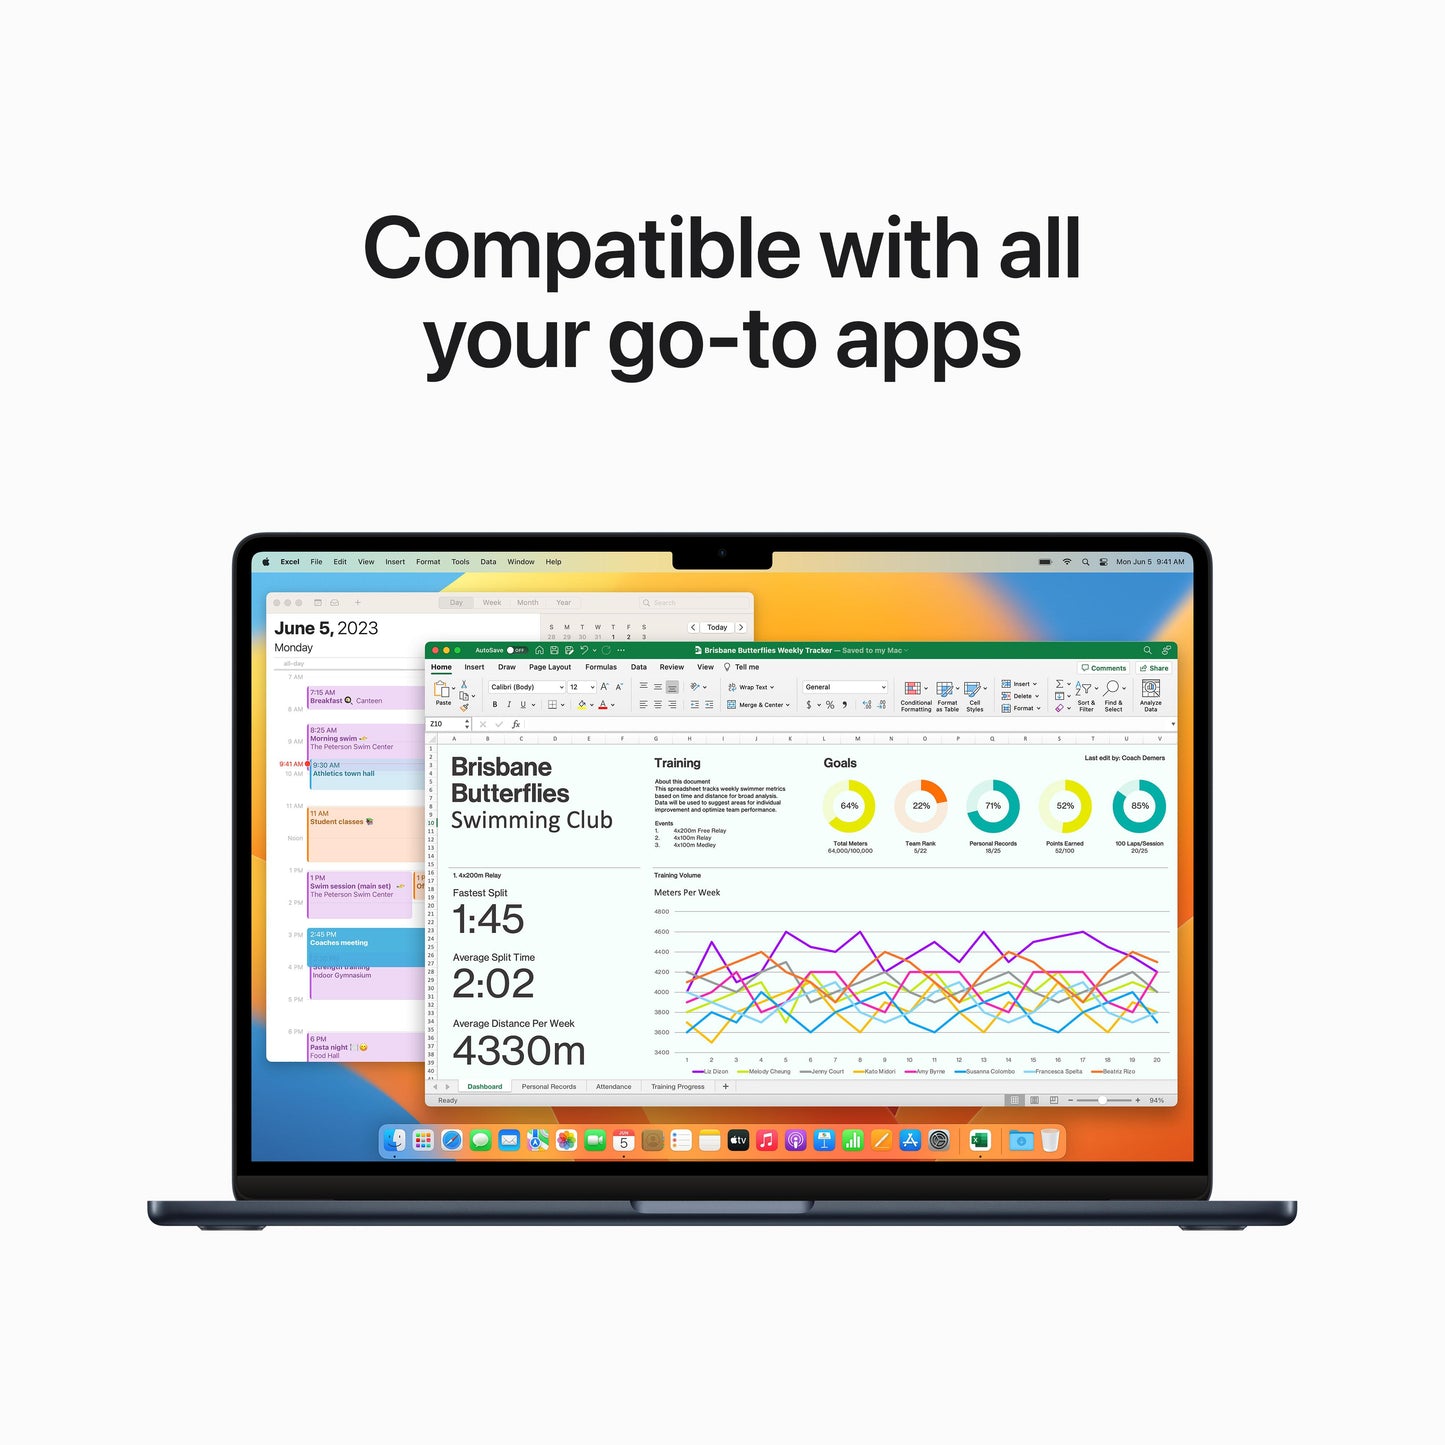 15-inch MacBook Air: Apple M2 chip with 8-core CPU and 10-core GPU, 256GB SSD - Midnight